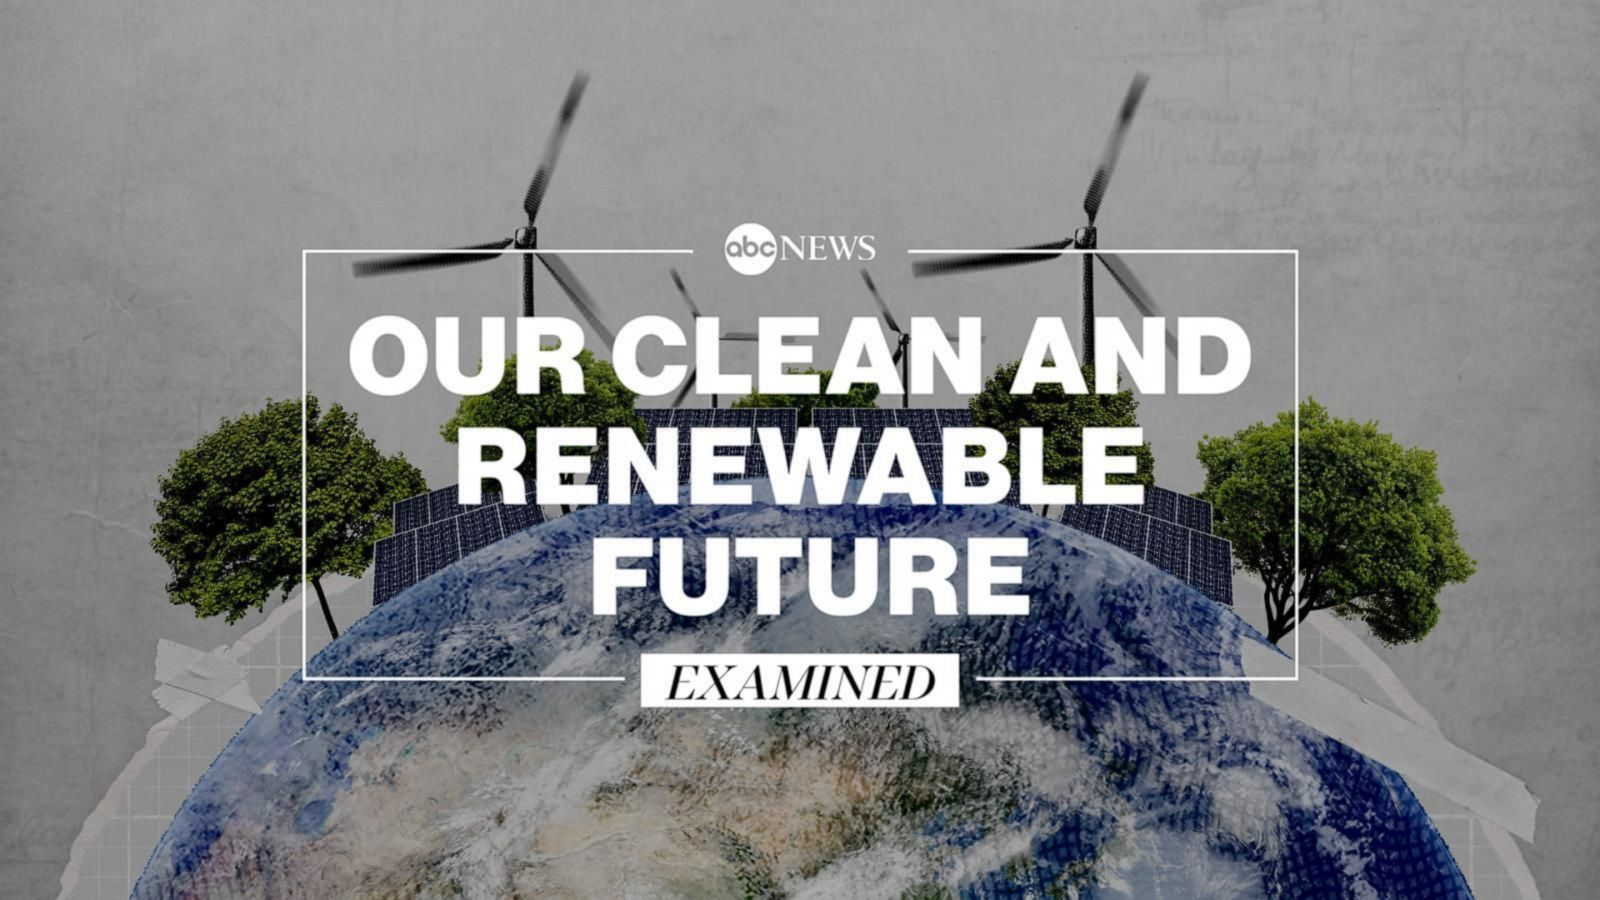 How we can build a clean and renewable future - Good Morning America